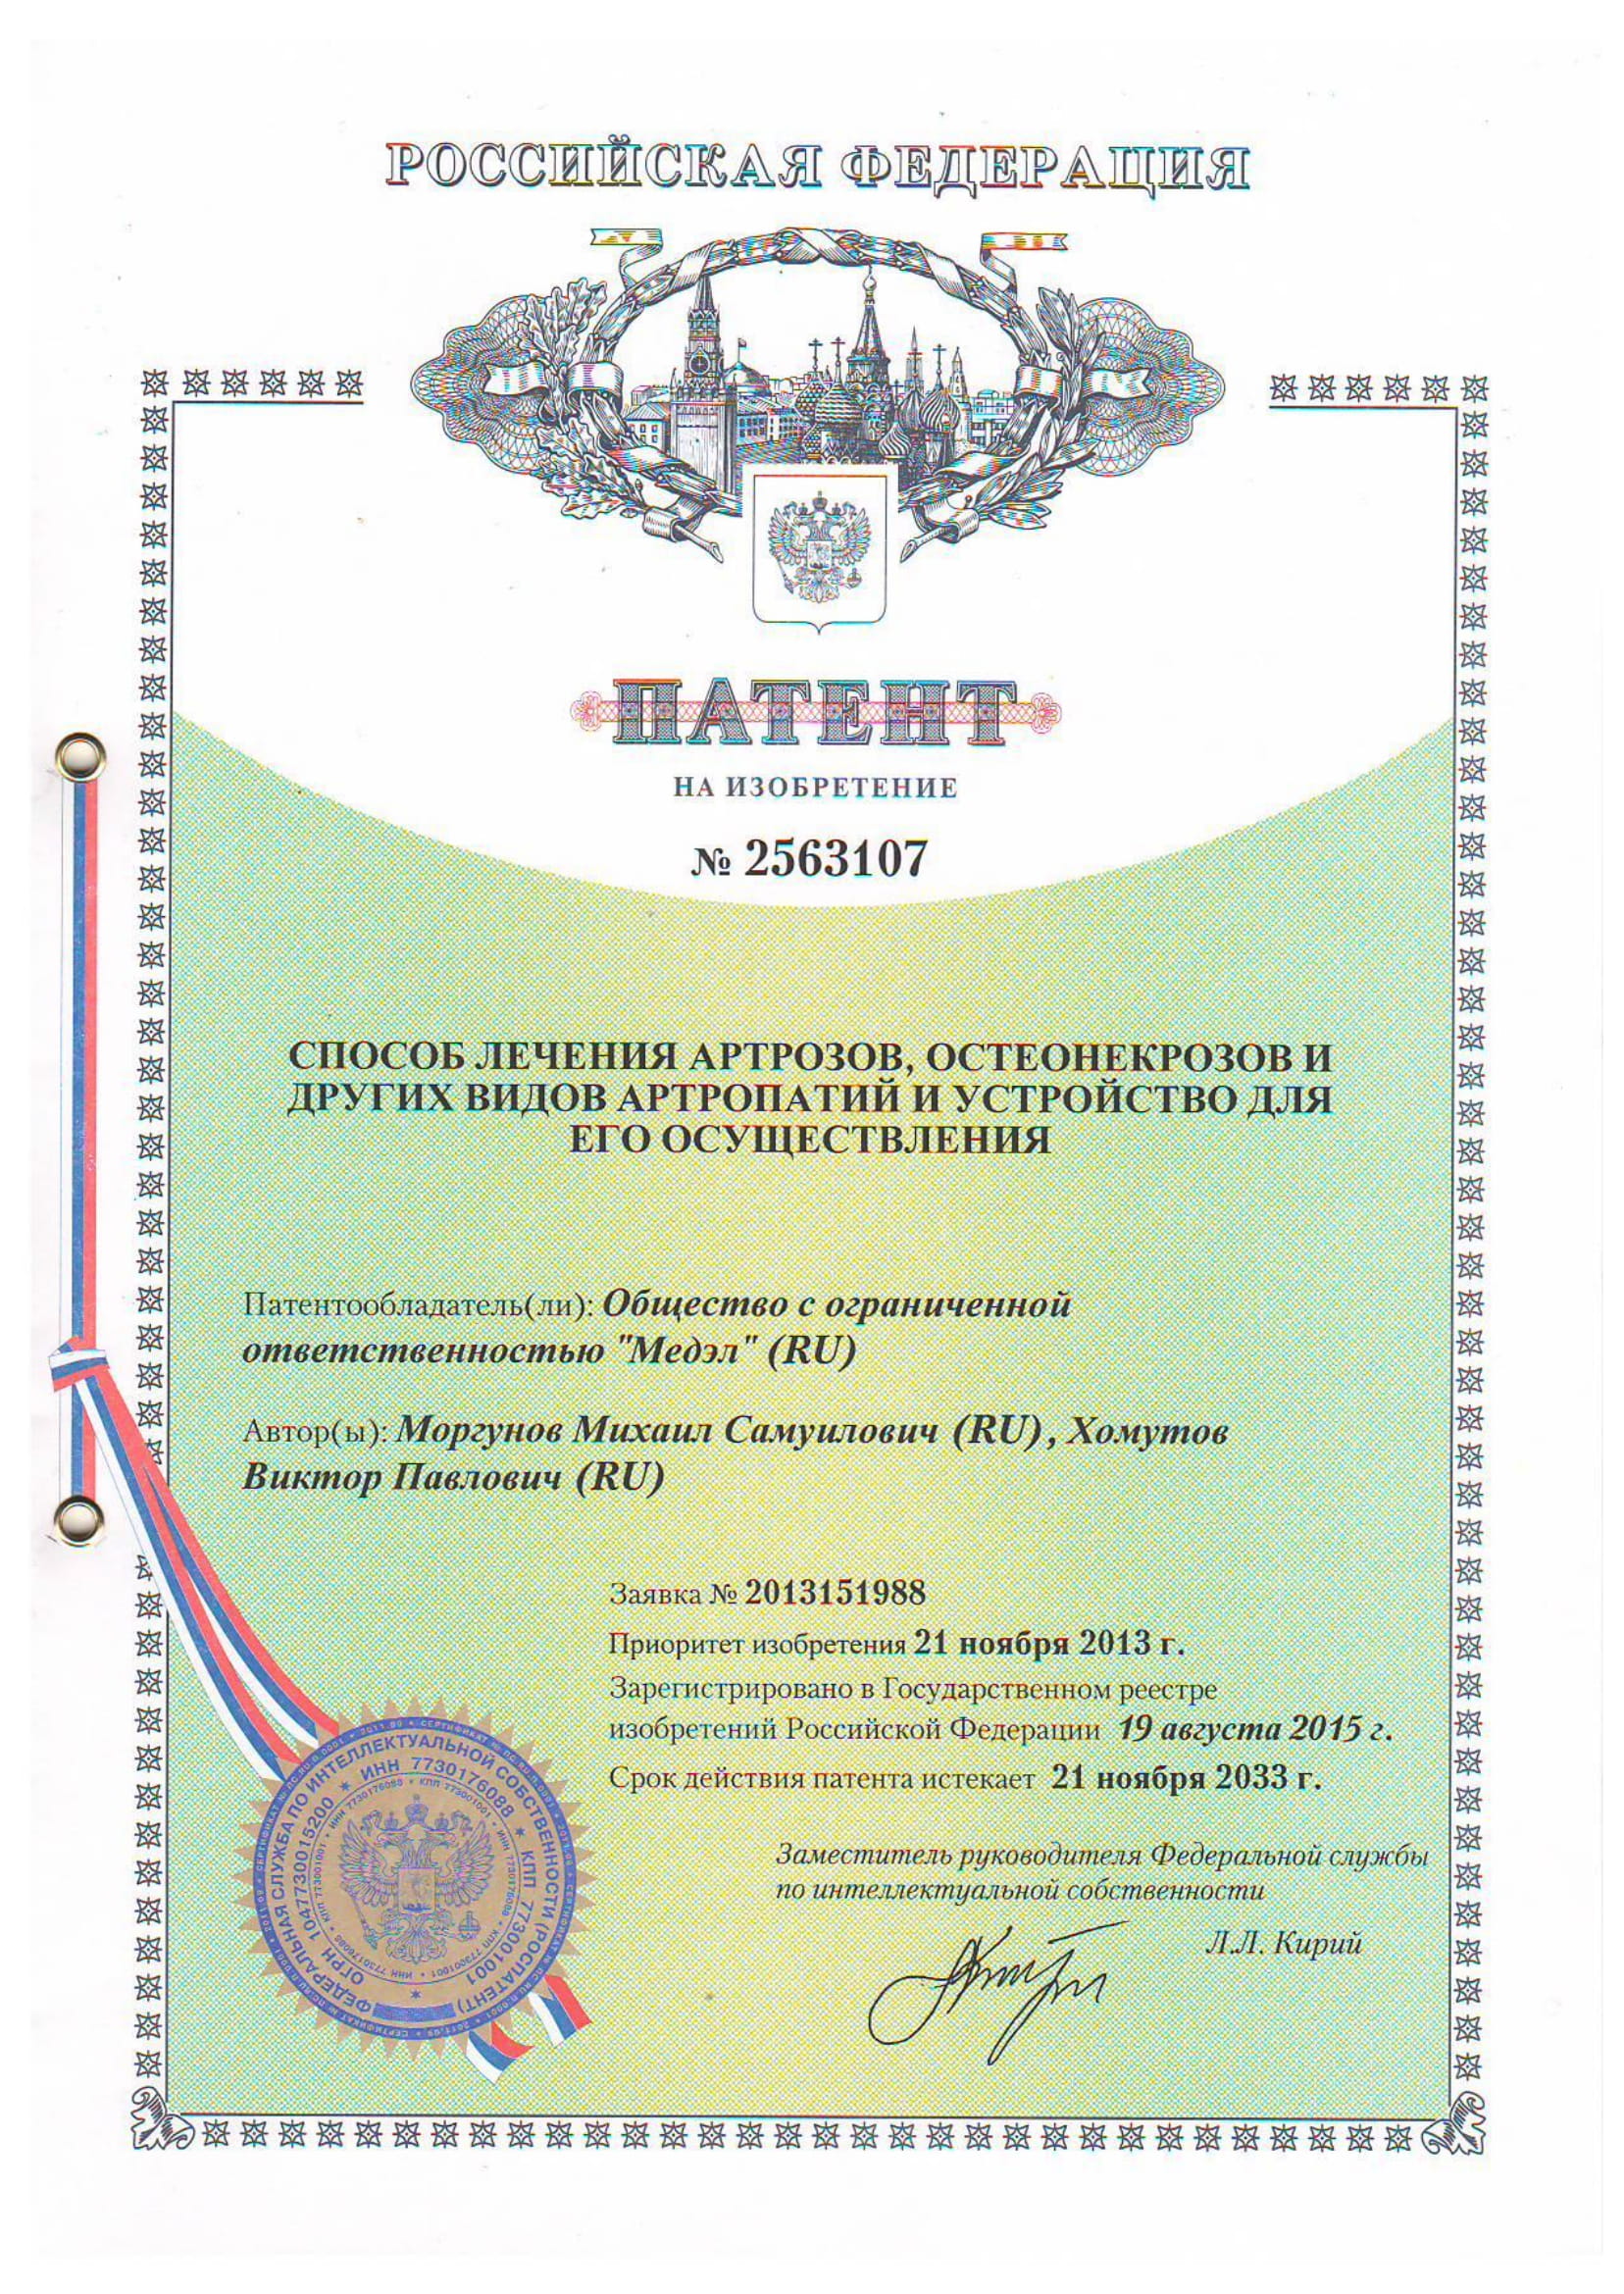 impleso-russian-patent